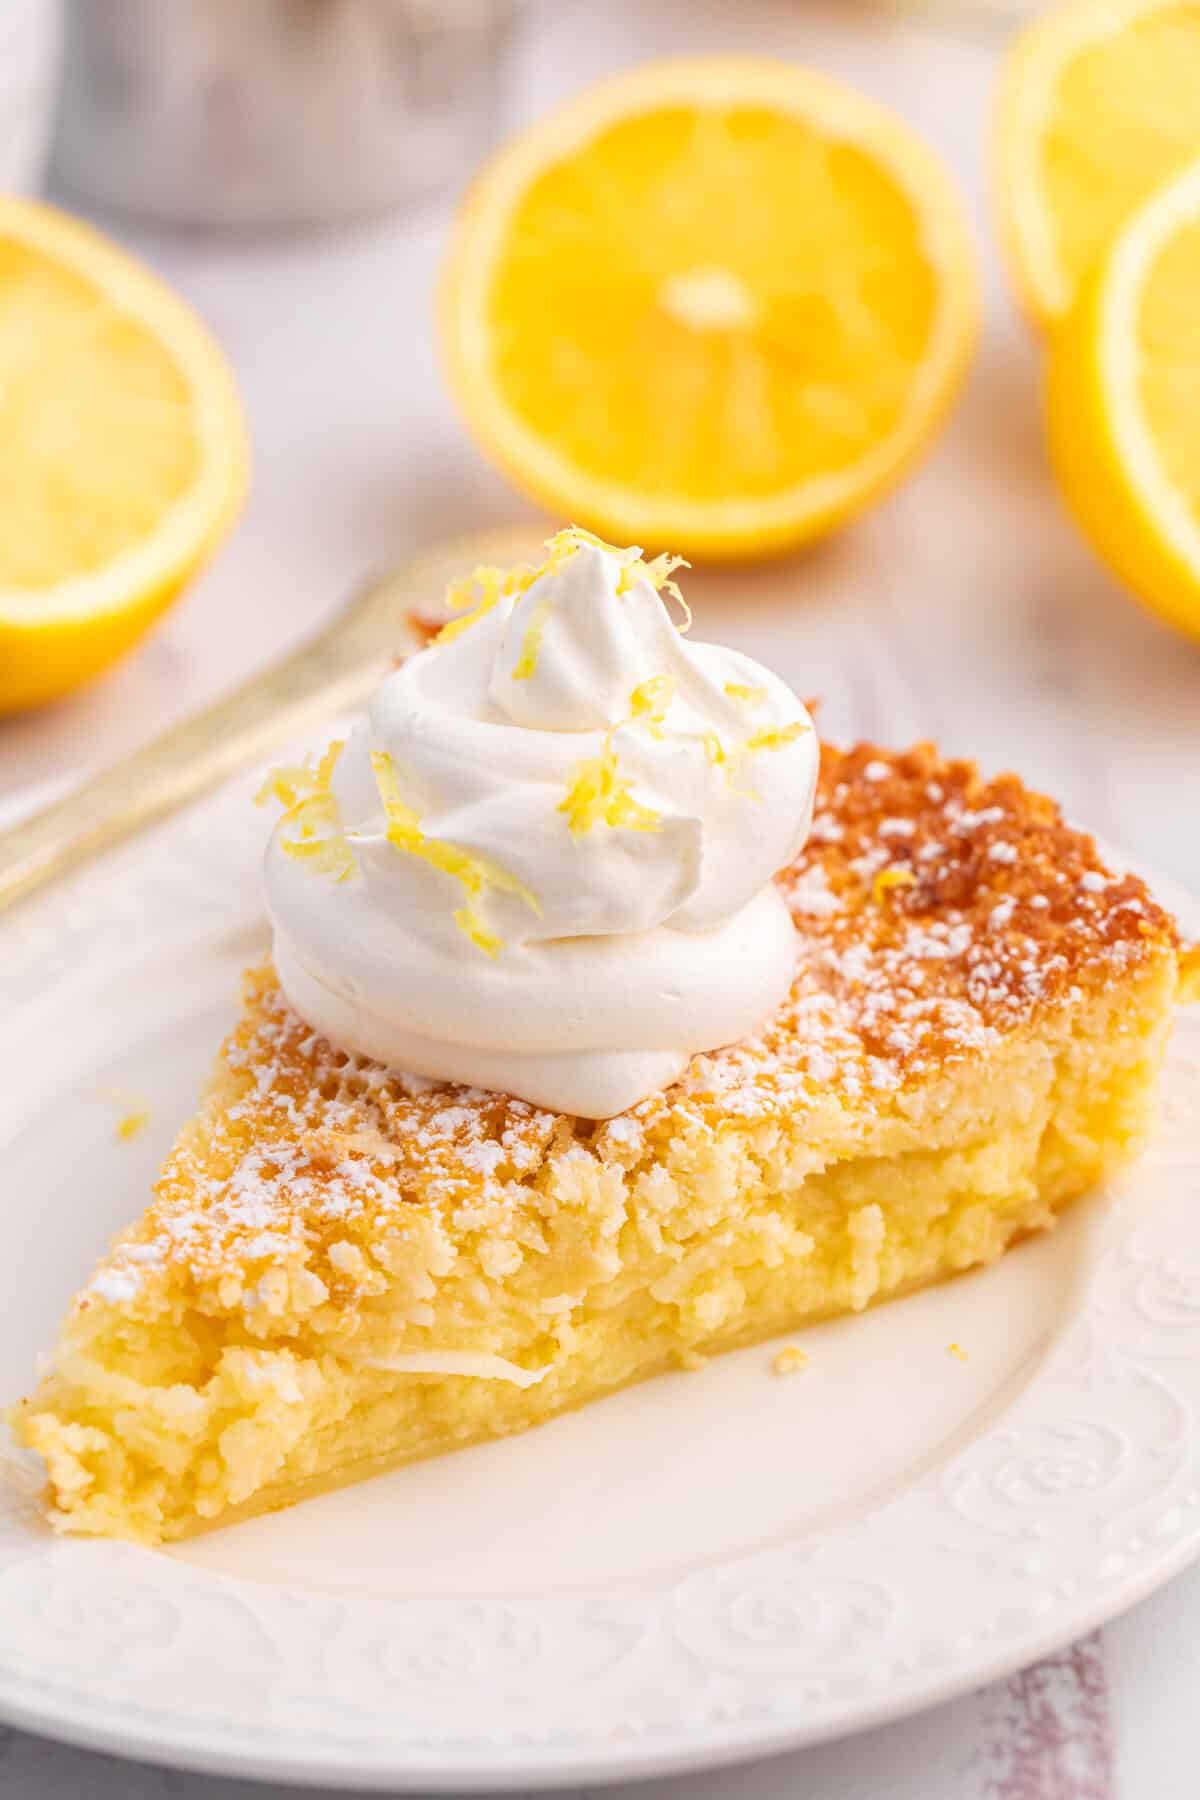 A slice of lemon impossible pie on a plate.